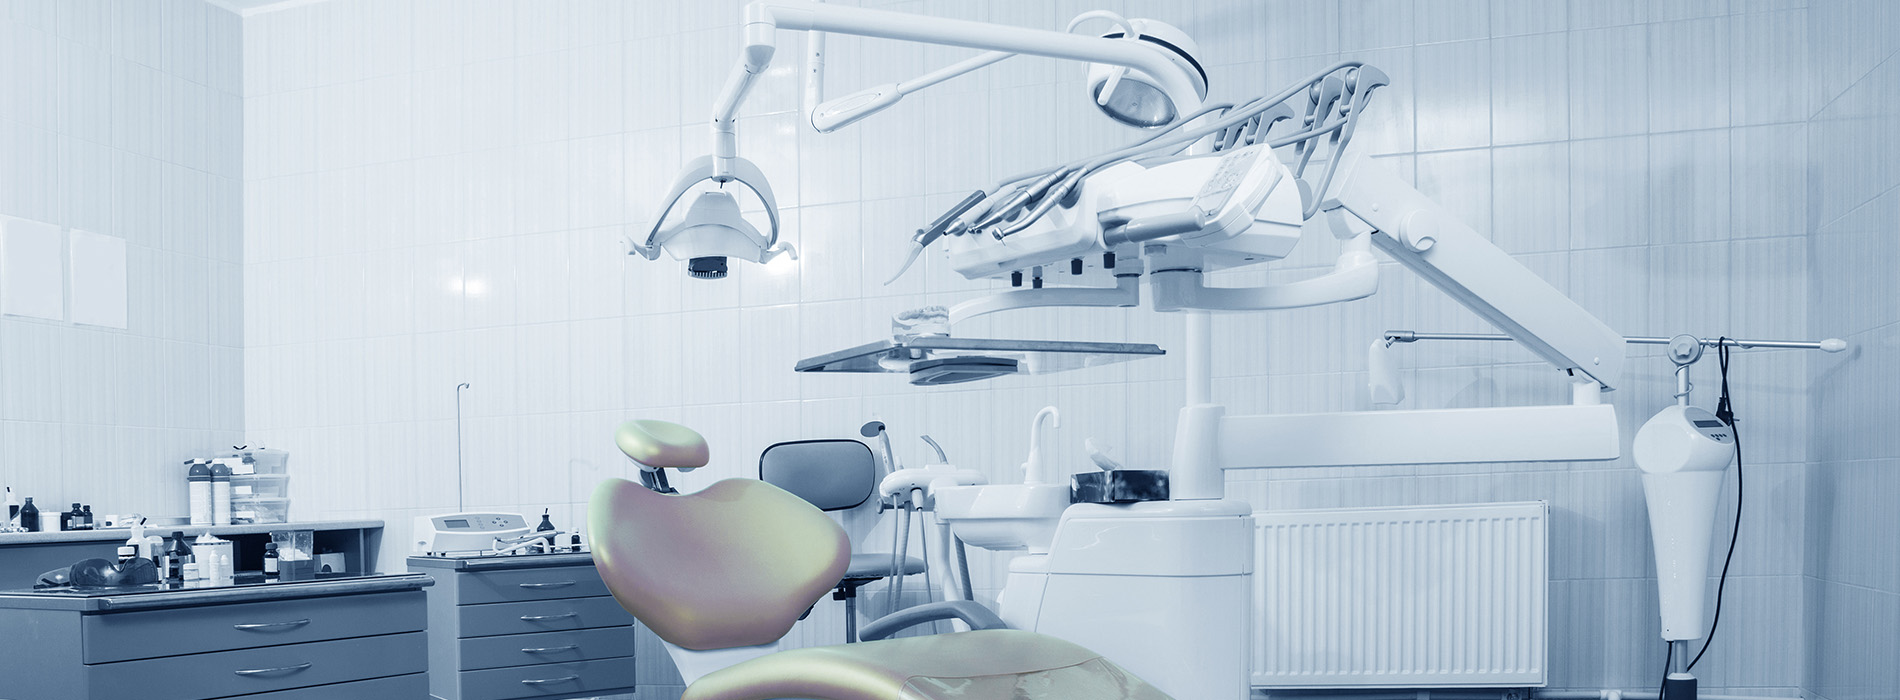 Pappas Family Dentistry | CBCT, Digital Radiography and Dental Fillings